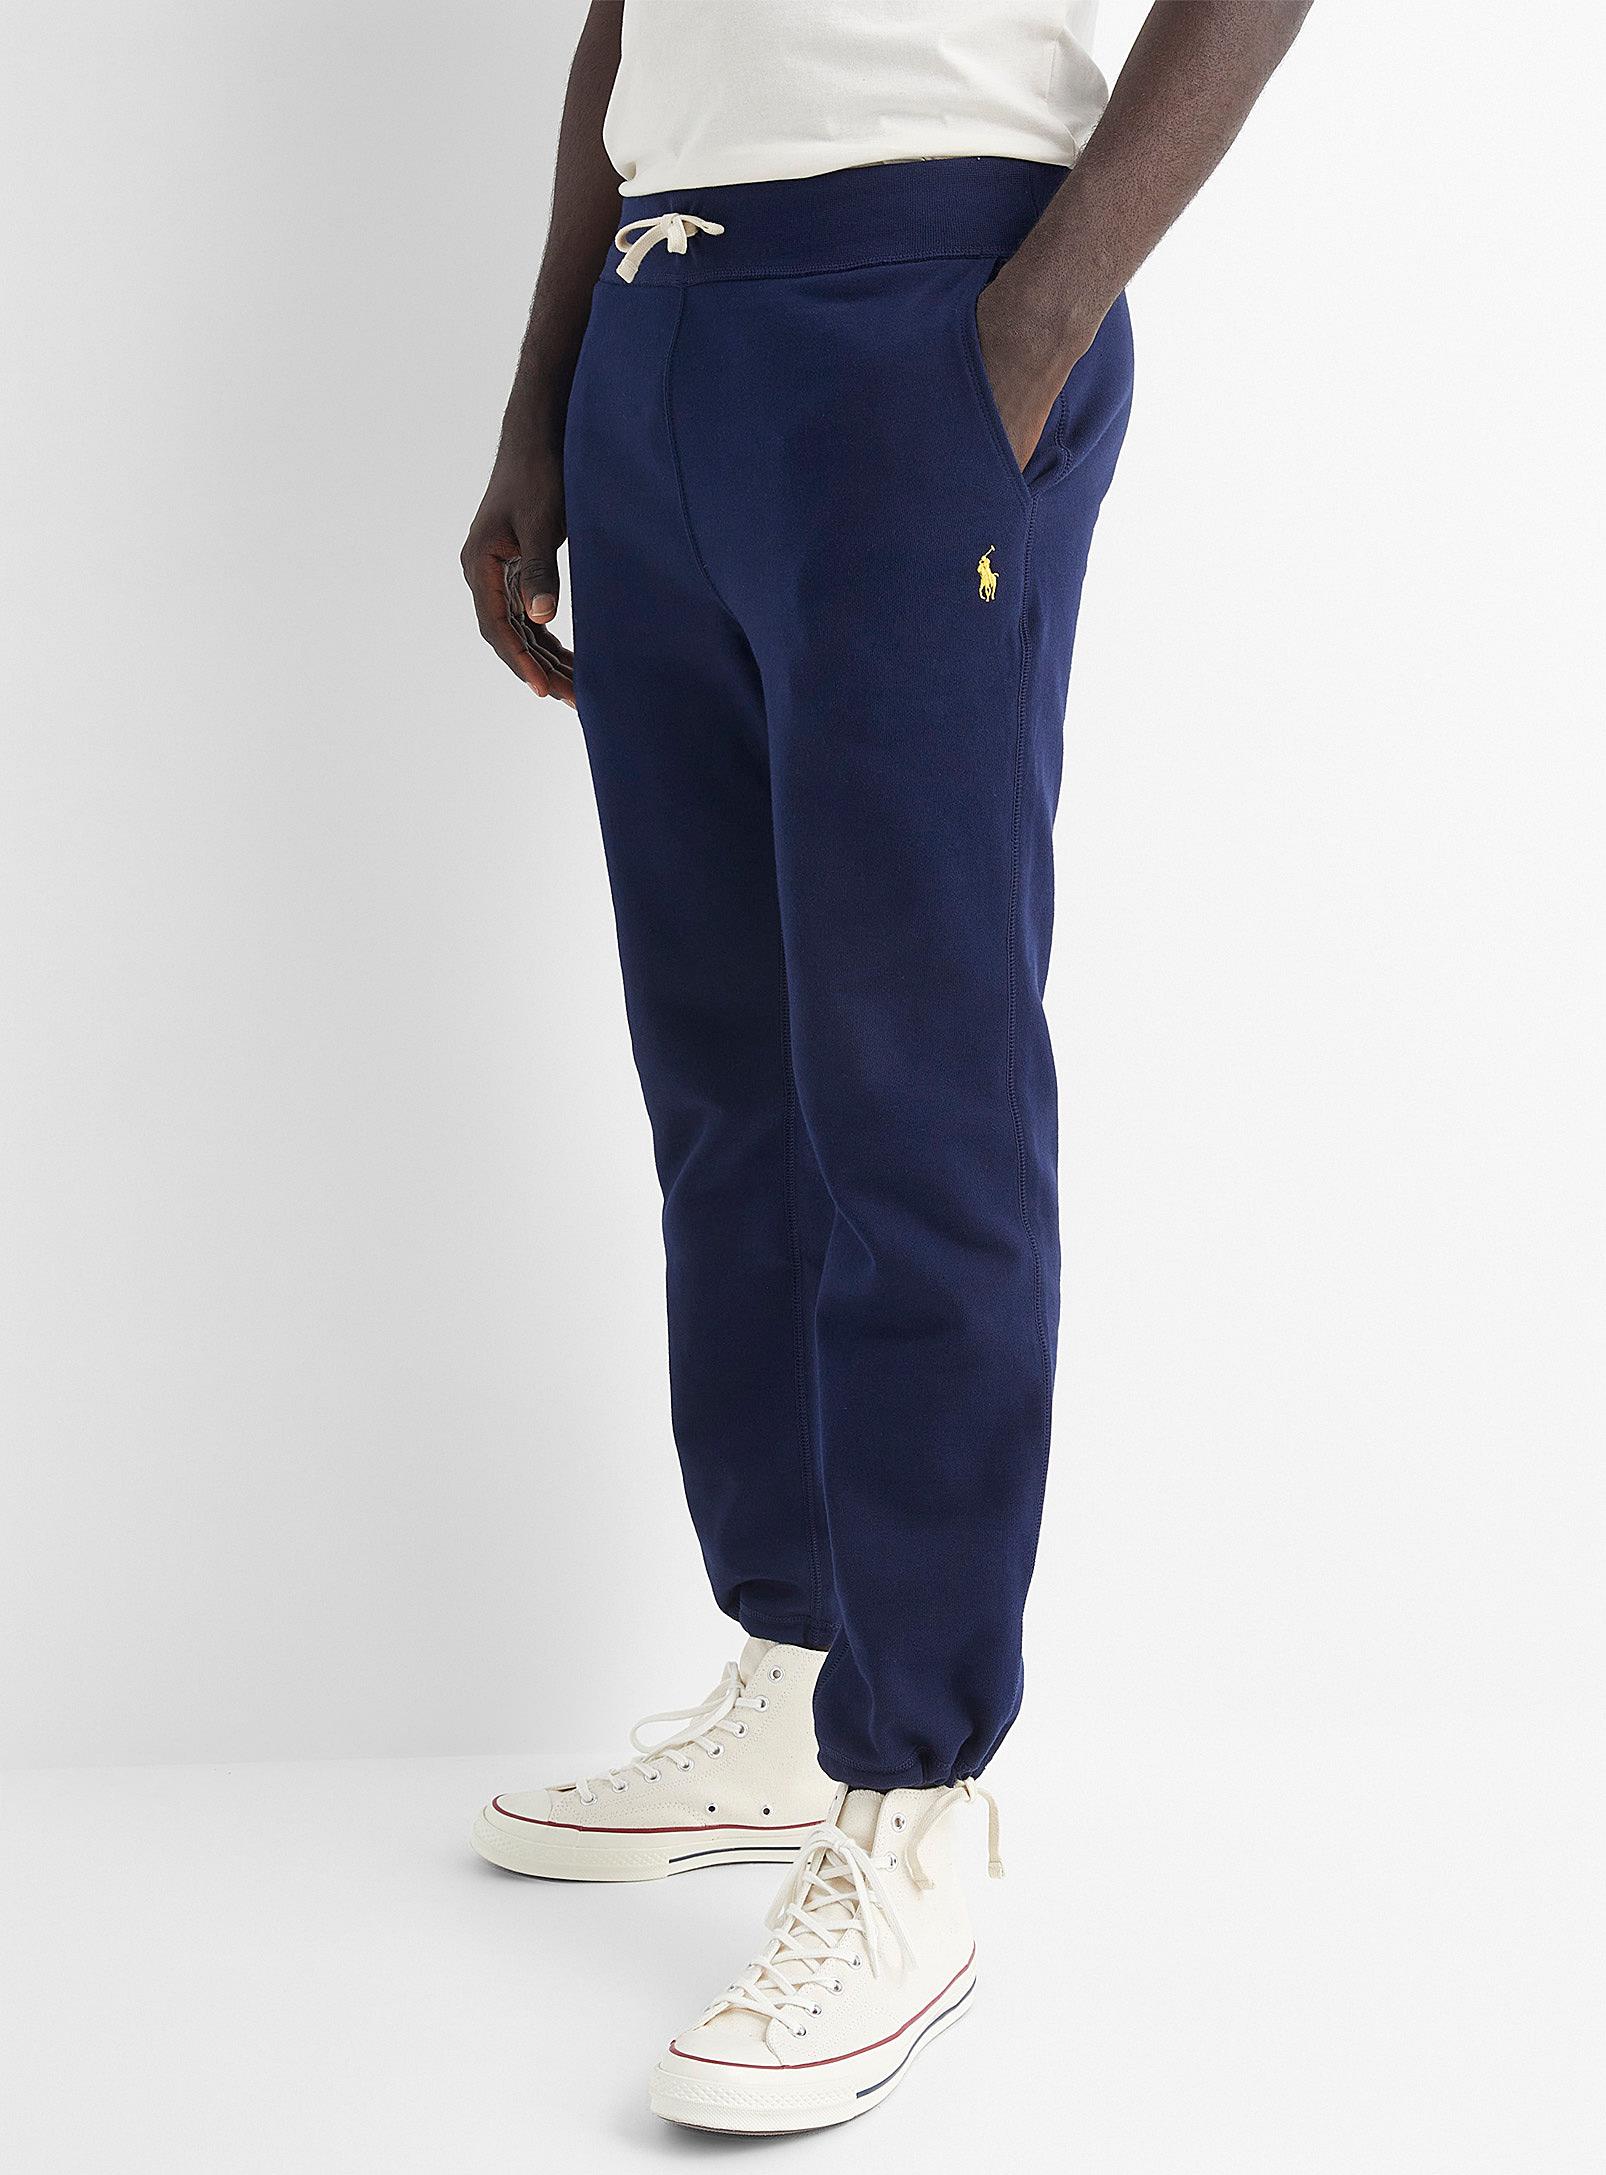 Polo Ralph Lauren Adjustable Ankle Minimalist joggers in Blue for